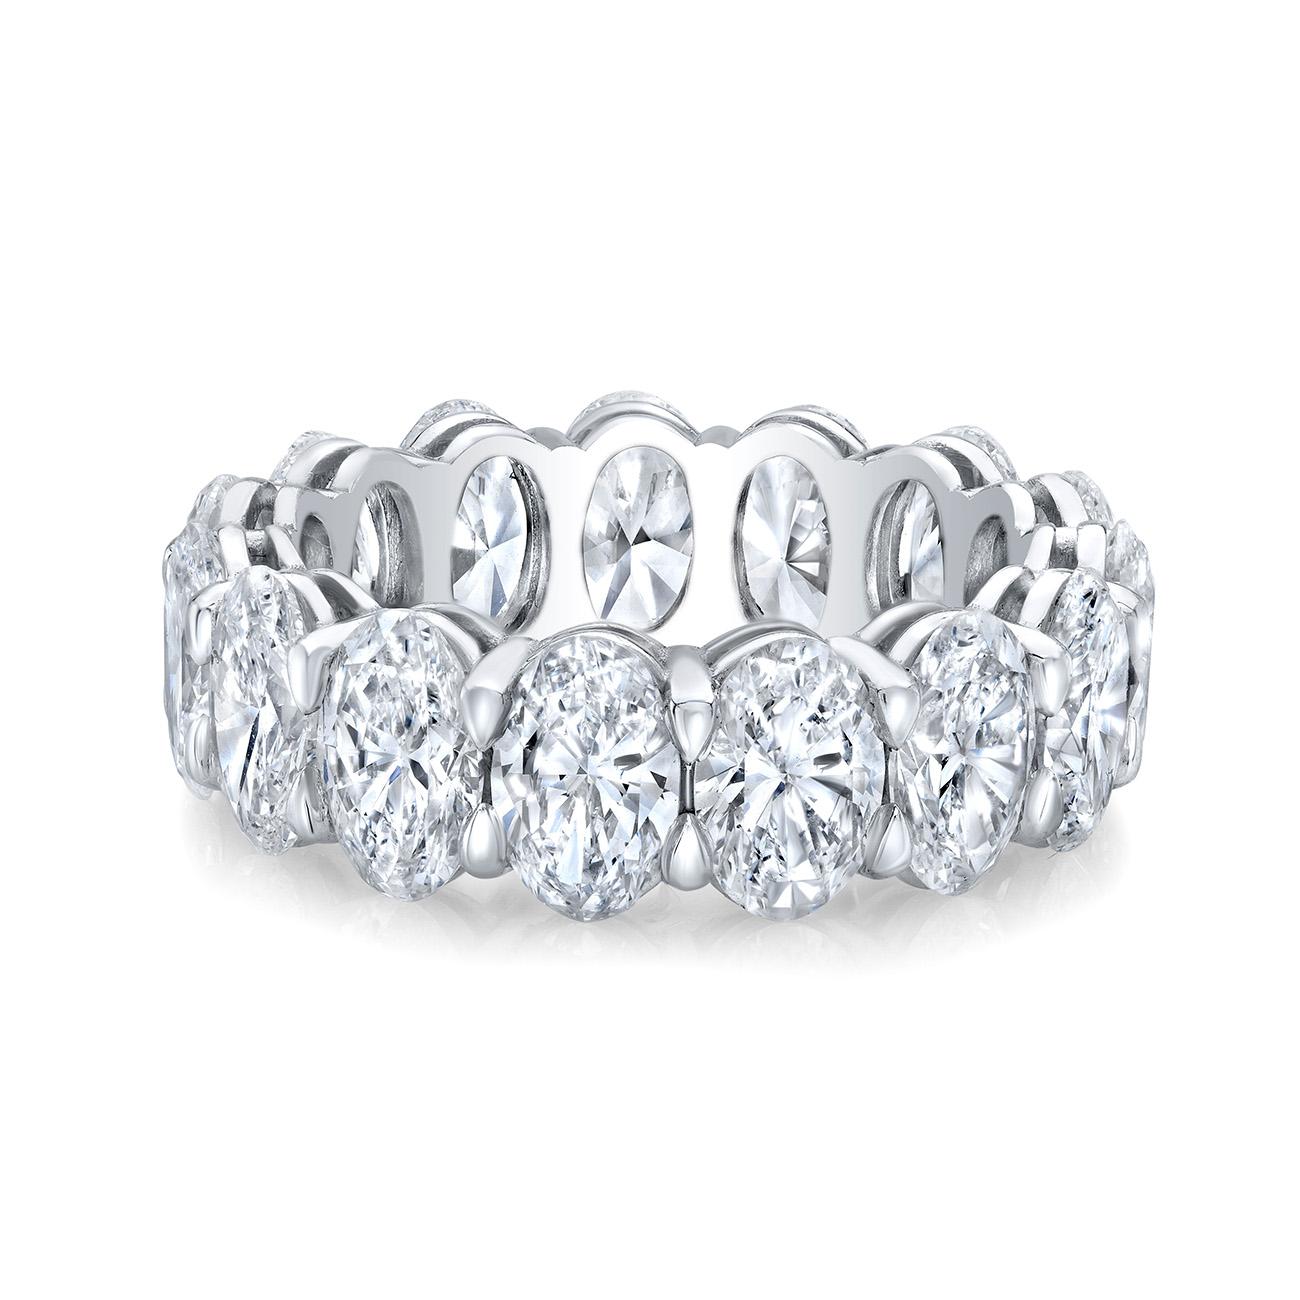 Women's Eternity Band in Platinum with Oval Cut Diamonds. D4.16ct.t.w. For Sale